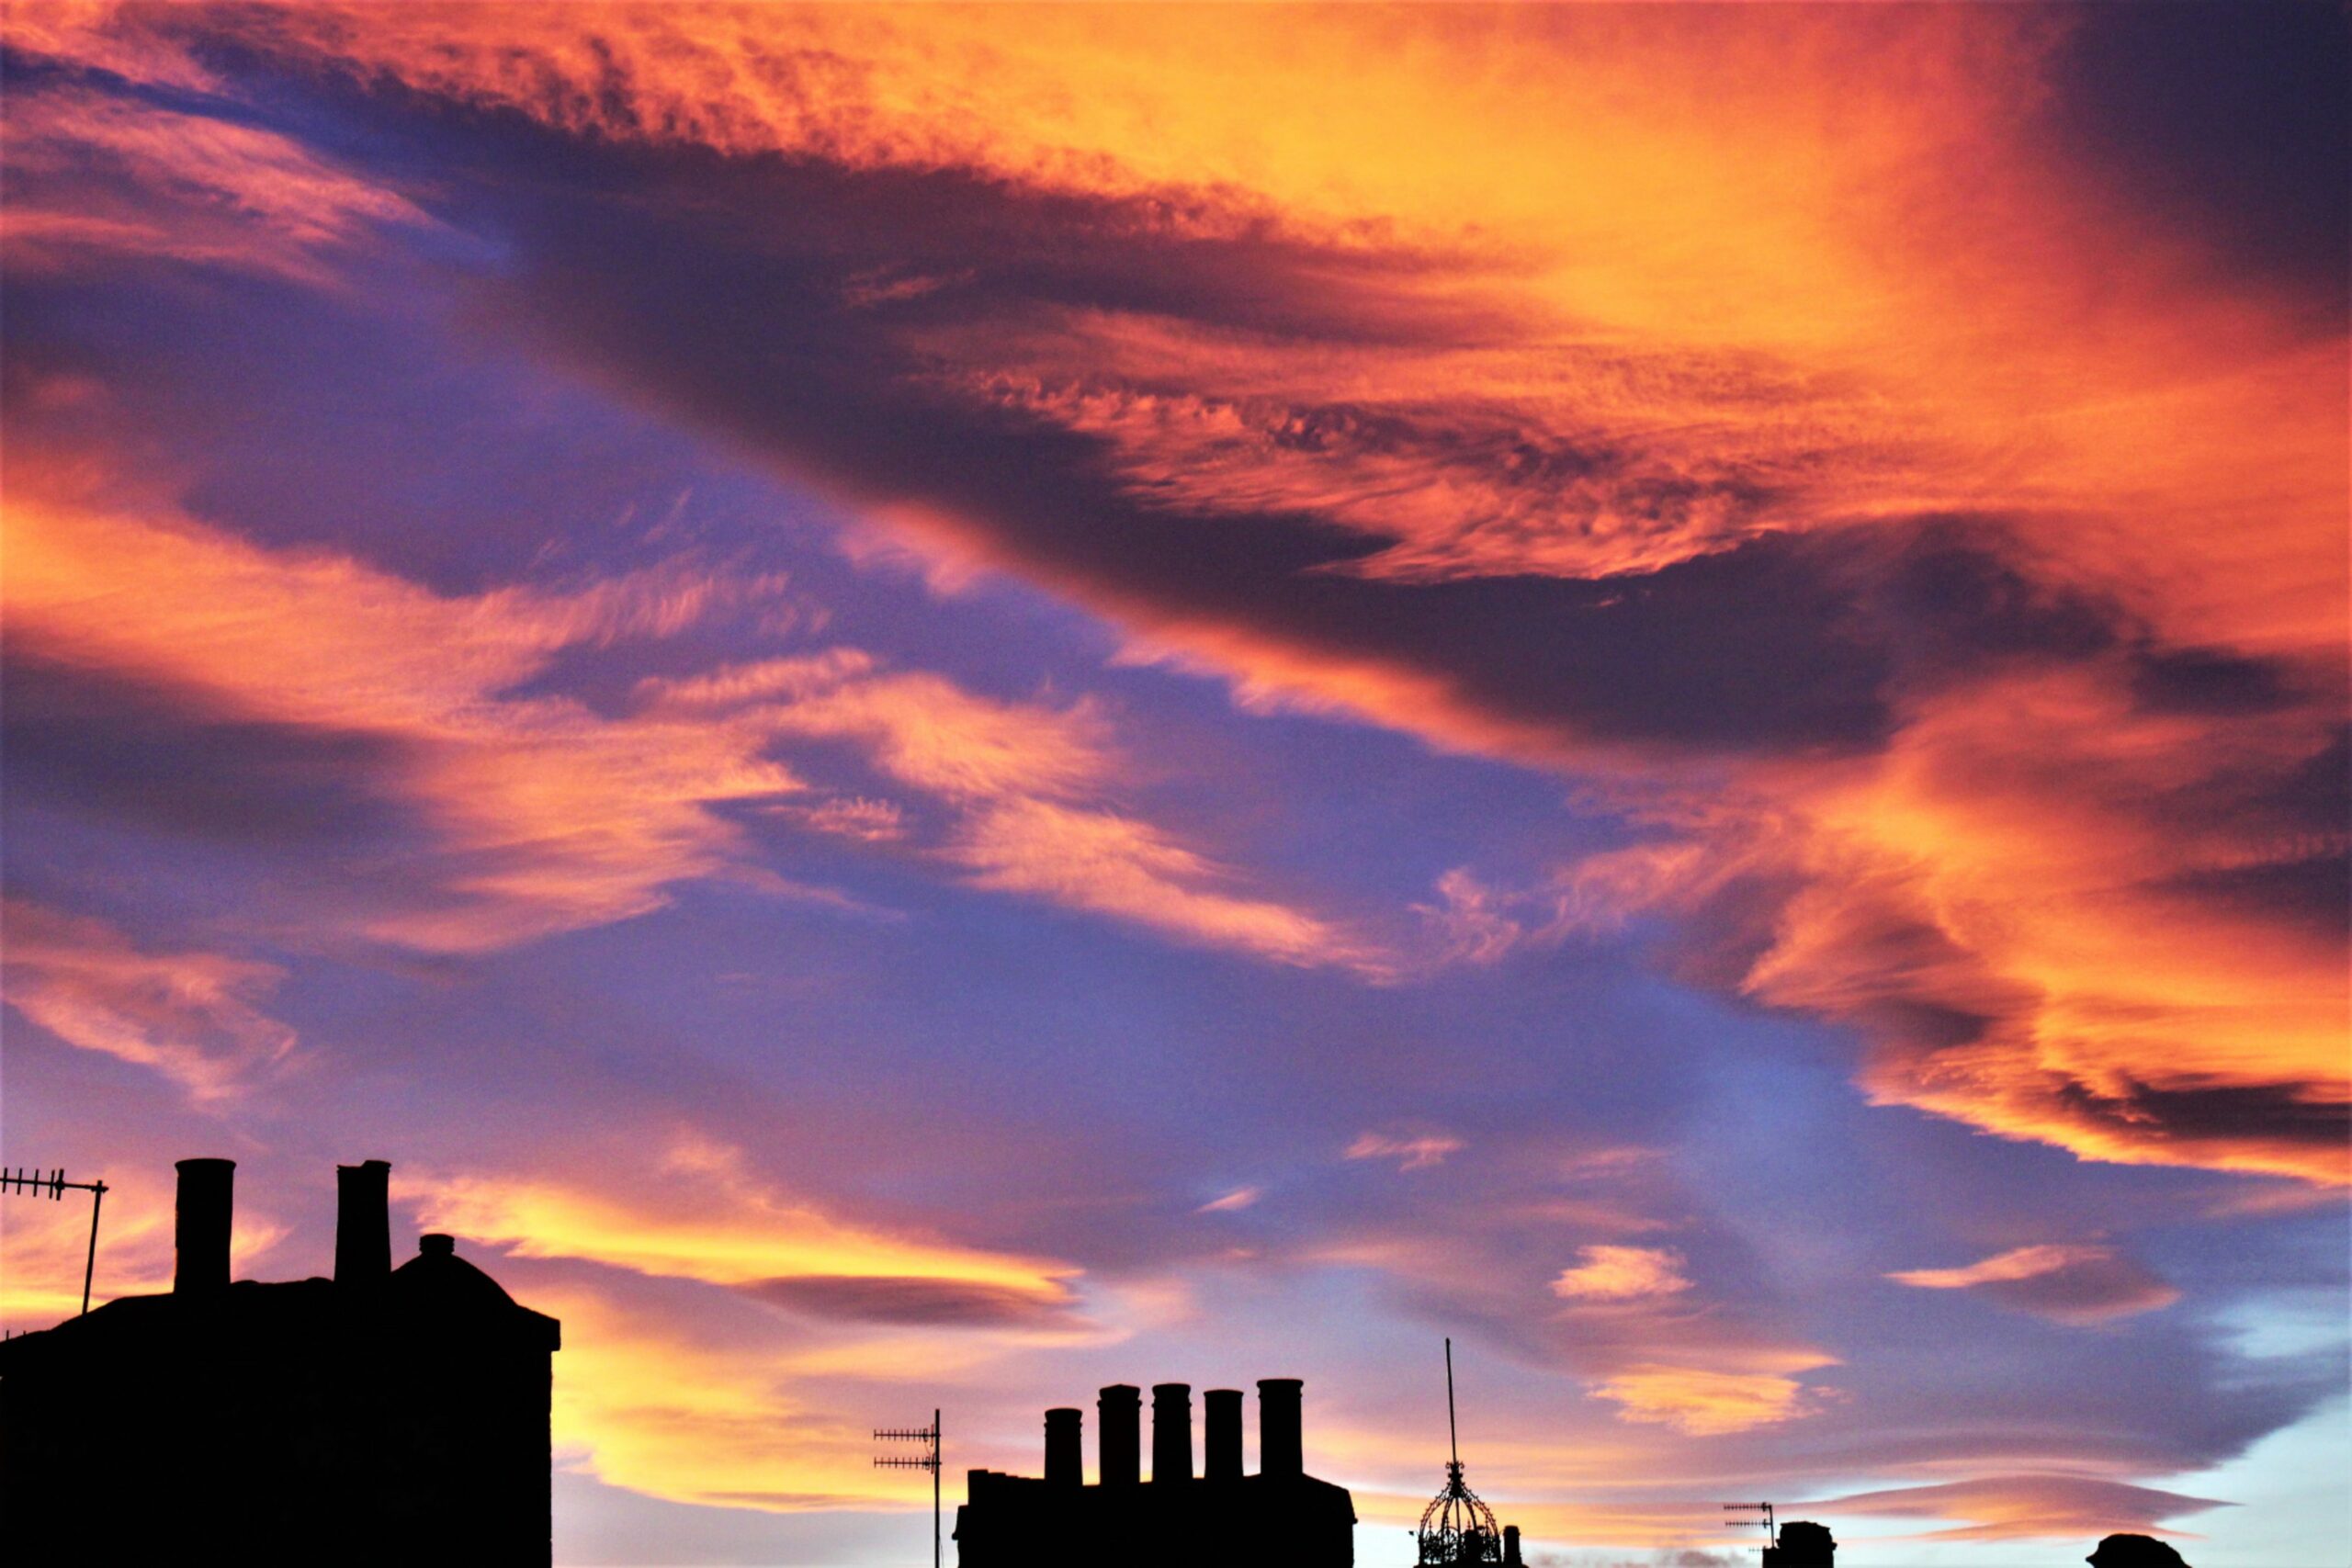 Sunset above the rooftops in Huntly